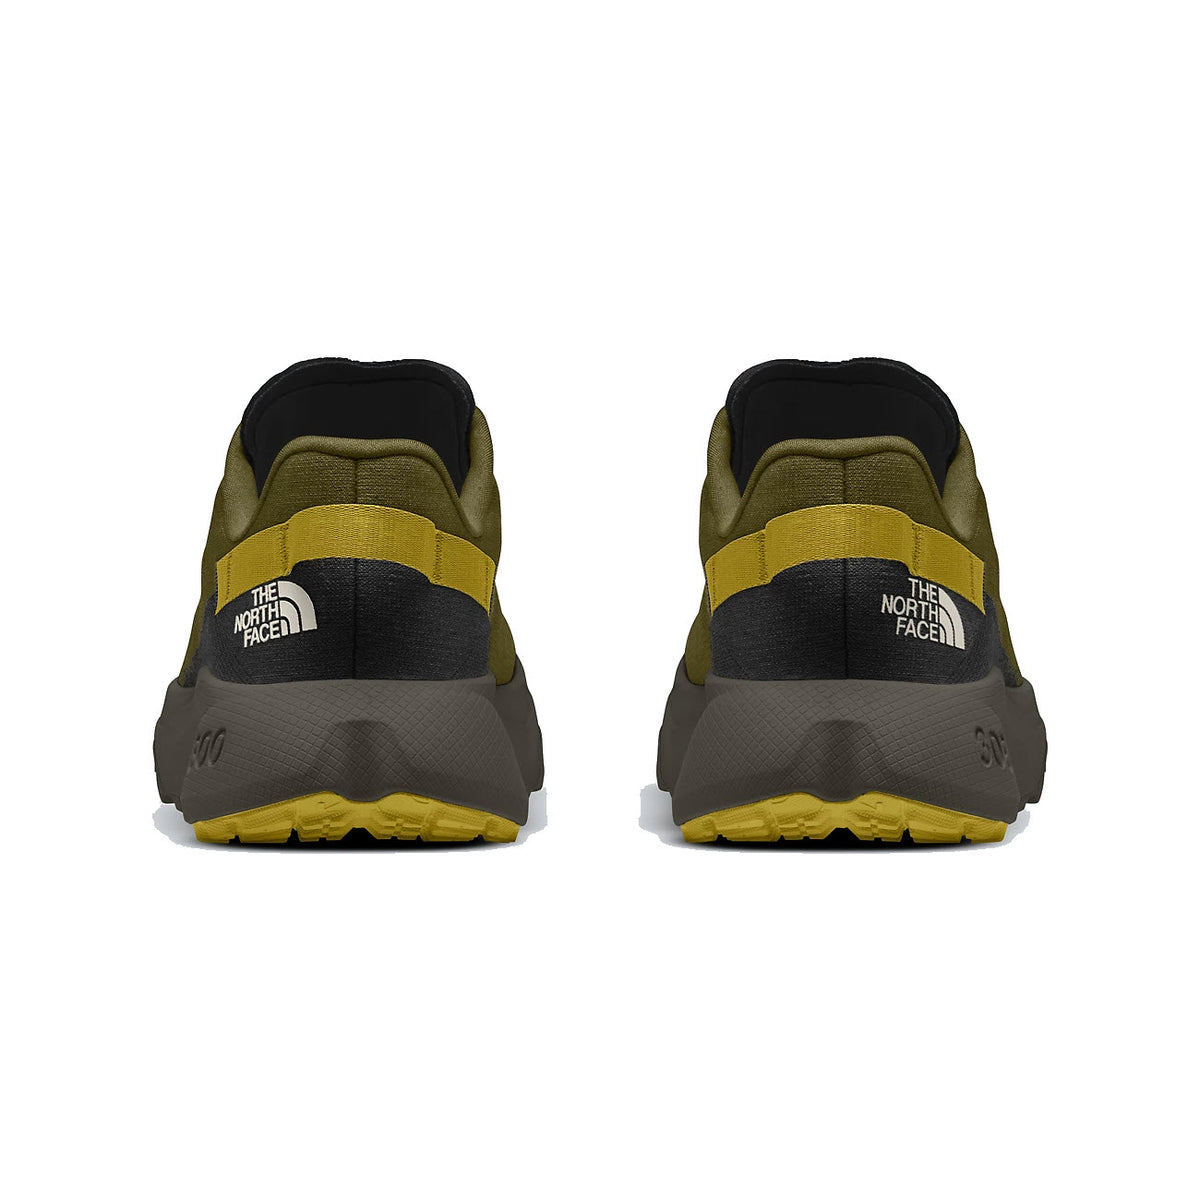 Rear view of two olive and yellow North Face ALTAMESA 300 FOREST OLIVE/TNF BLACK trail-running shoes featuring SURFACE CTRL rubber outsoles, against a white background.